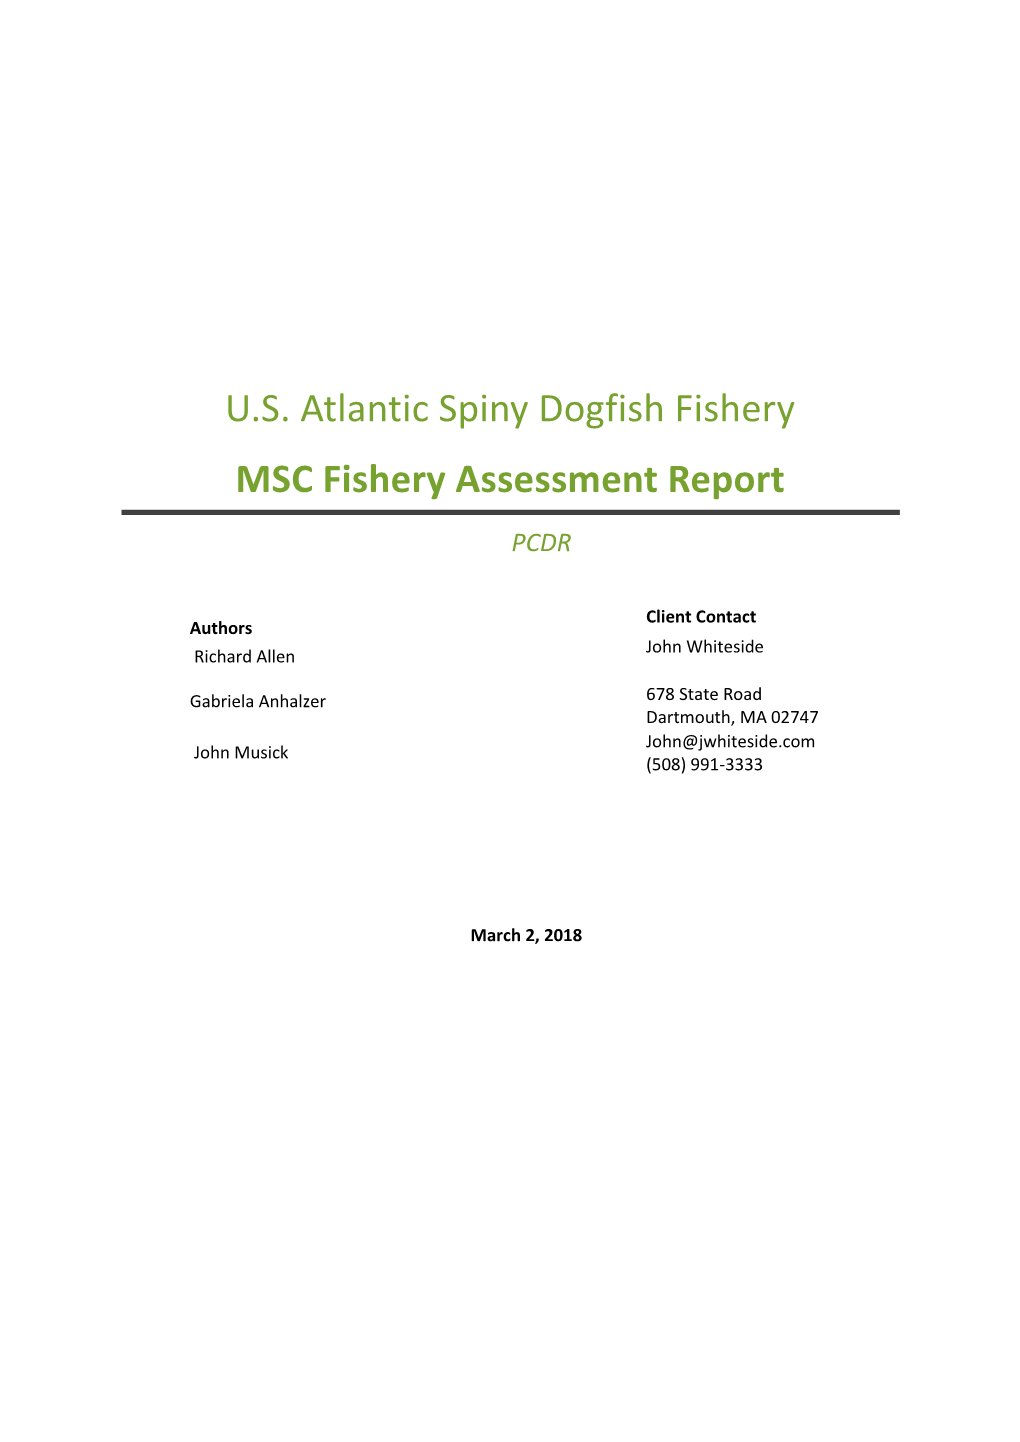 U.S. Atlantic Spiny Dogfish Fishery MSC Fishery Assessment Report